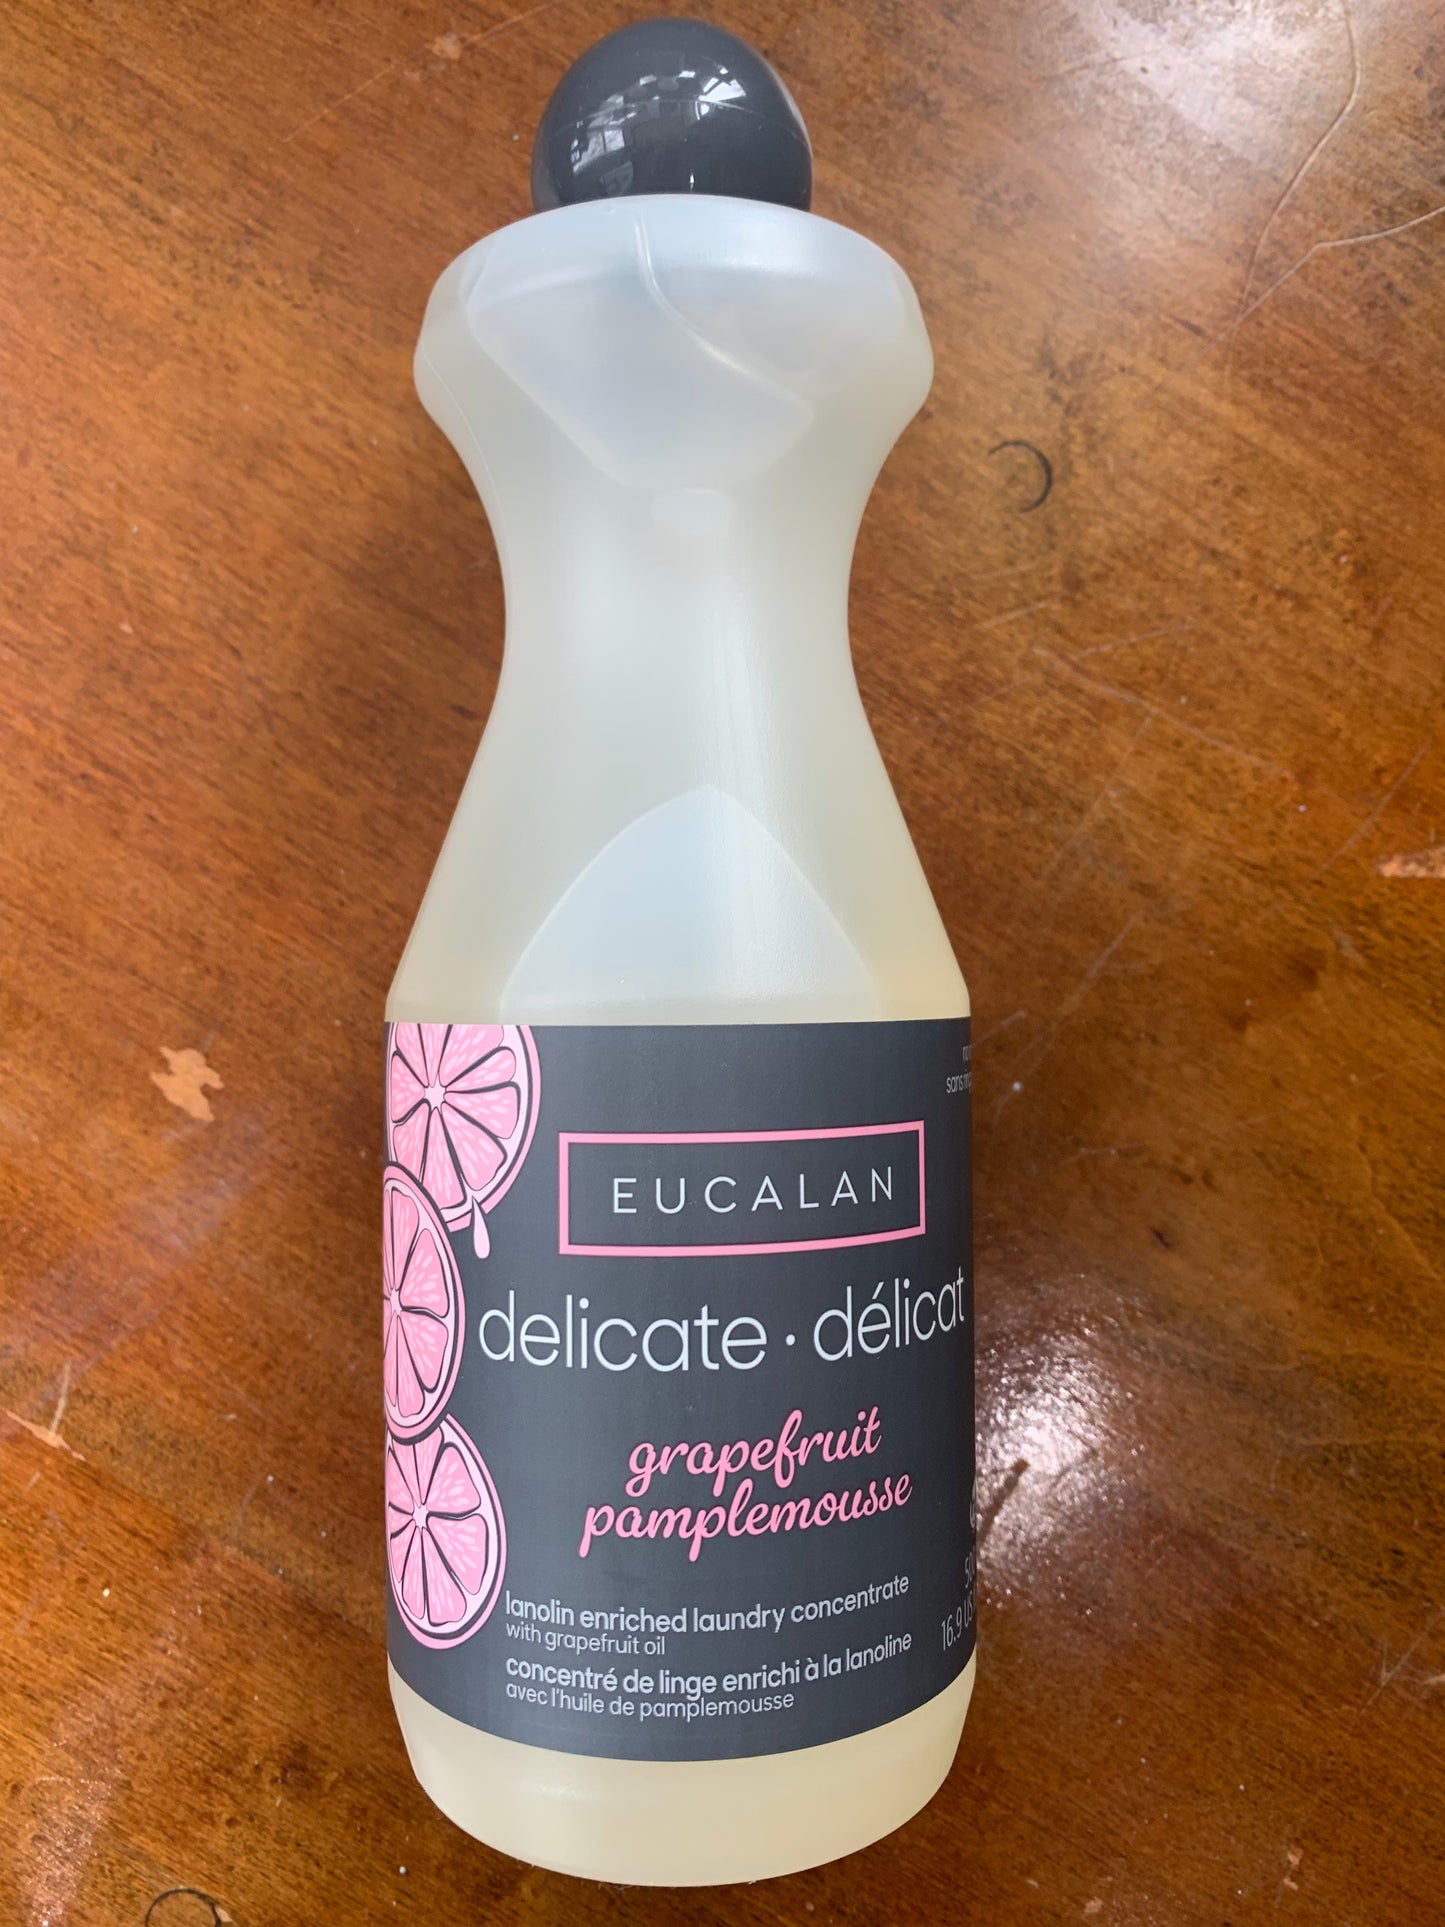 Eucalan Delicate - Lanolin enriched laundry concentrate